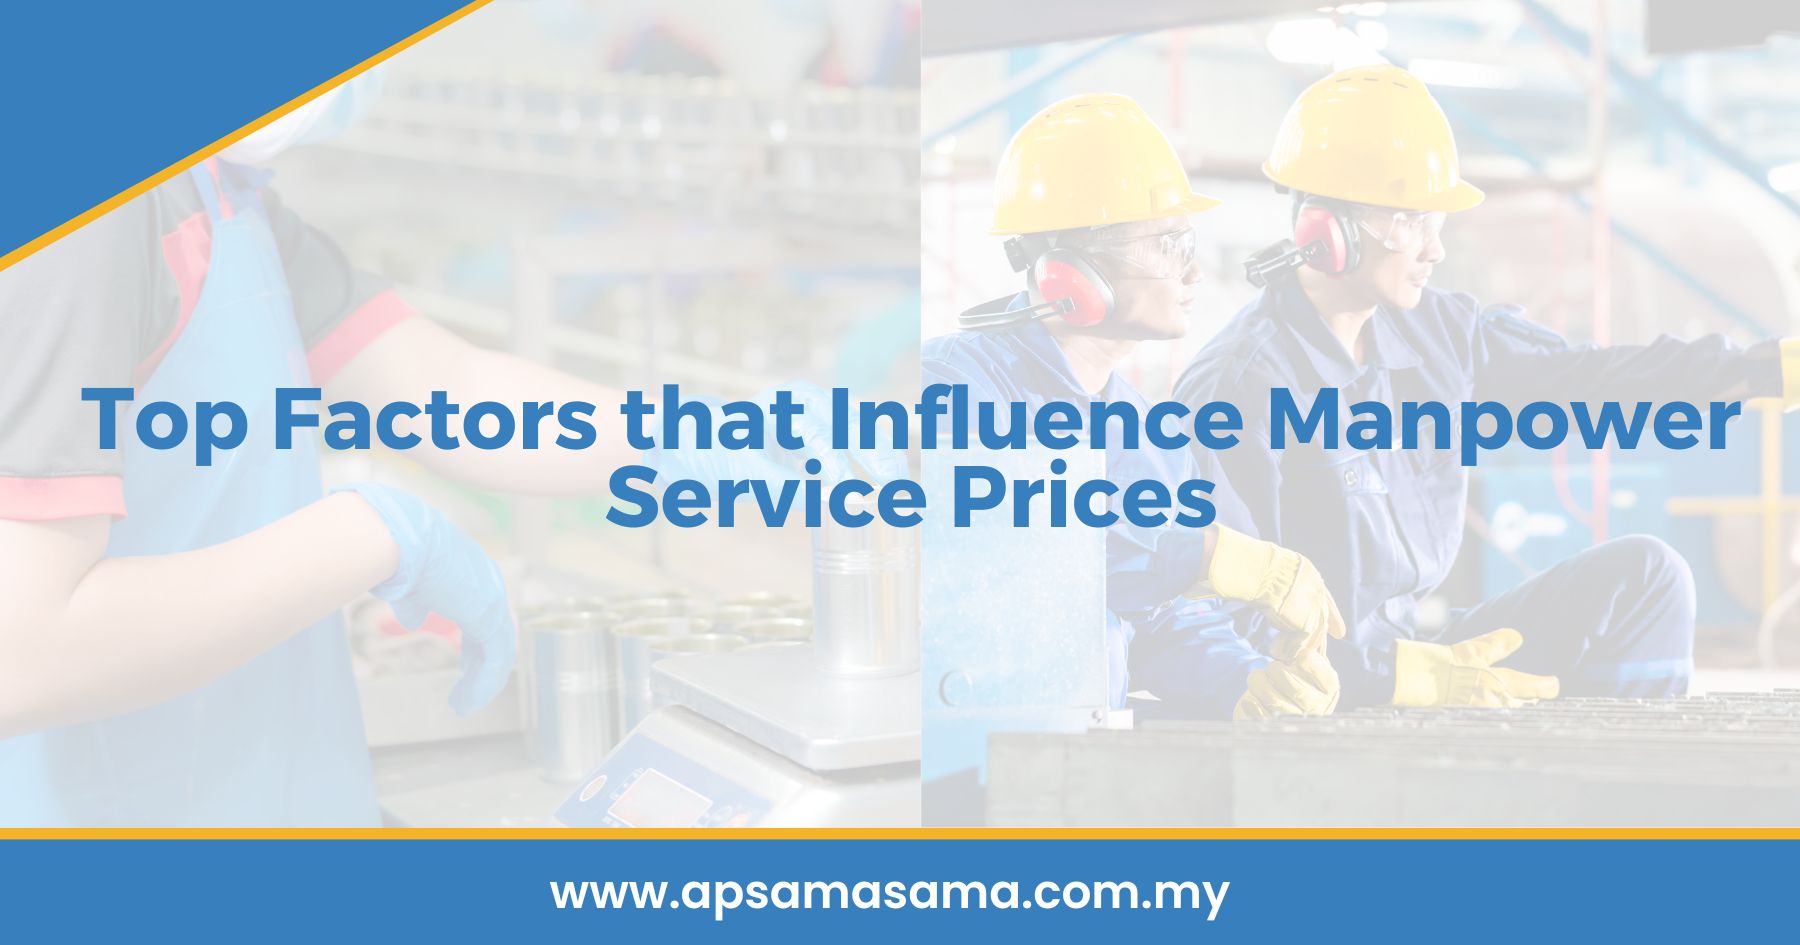 Top Factors that Influence Manpower Service Prices